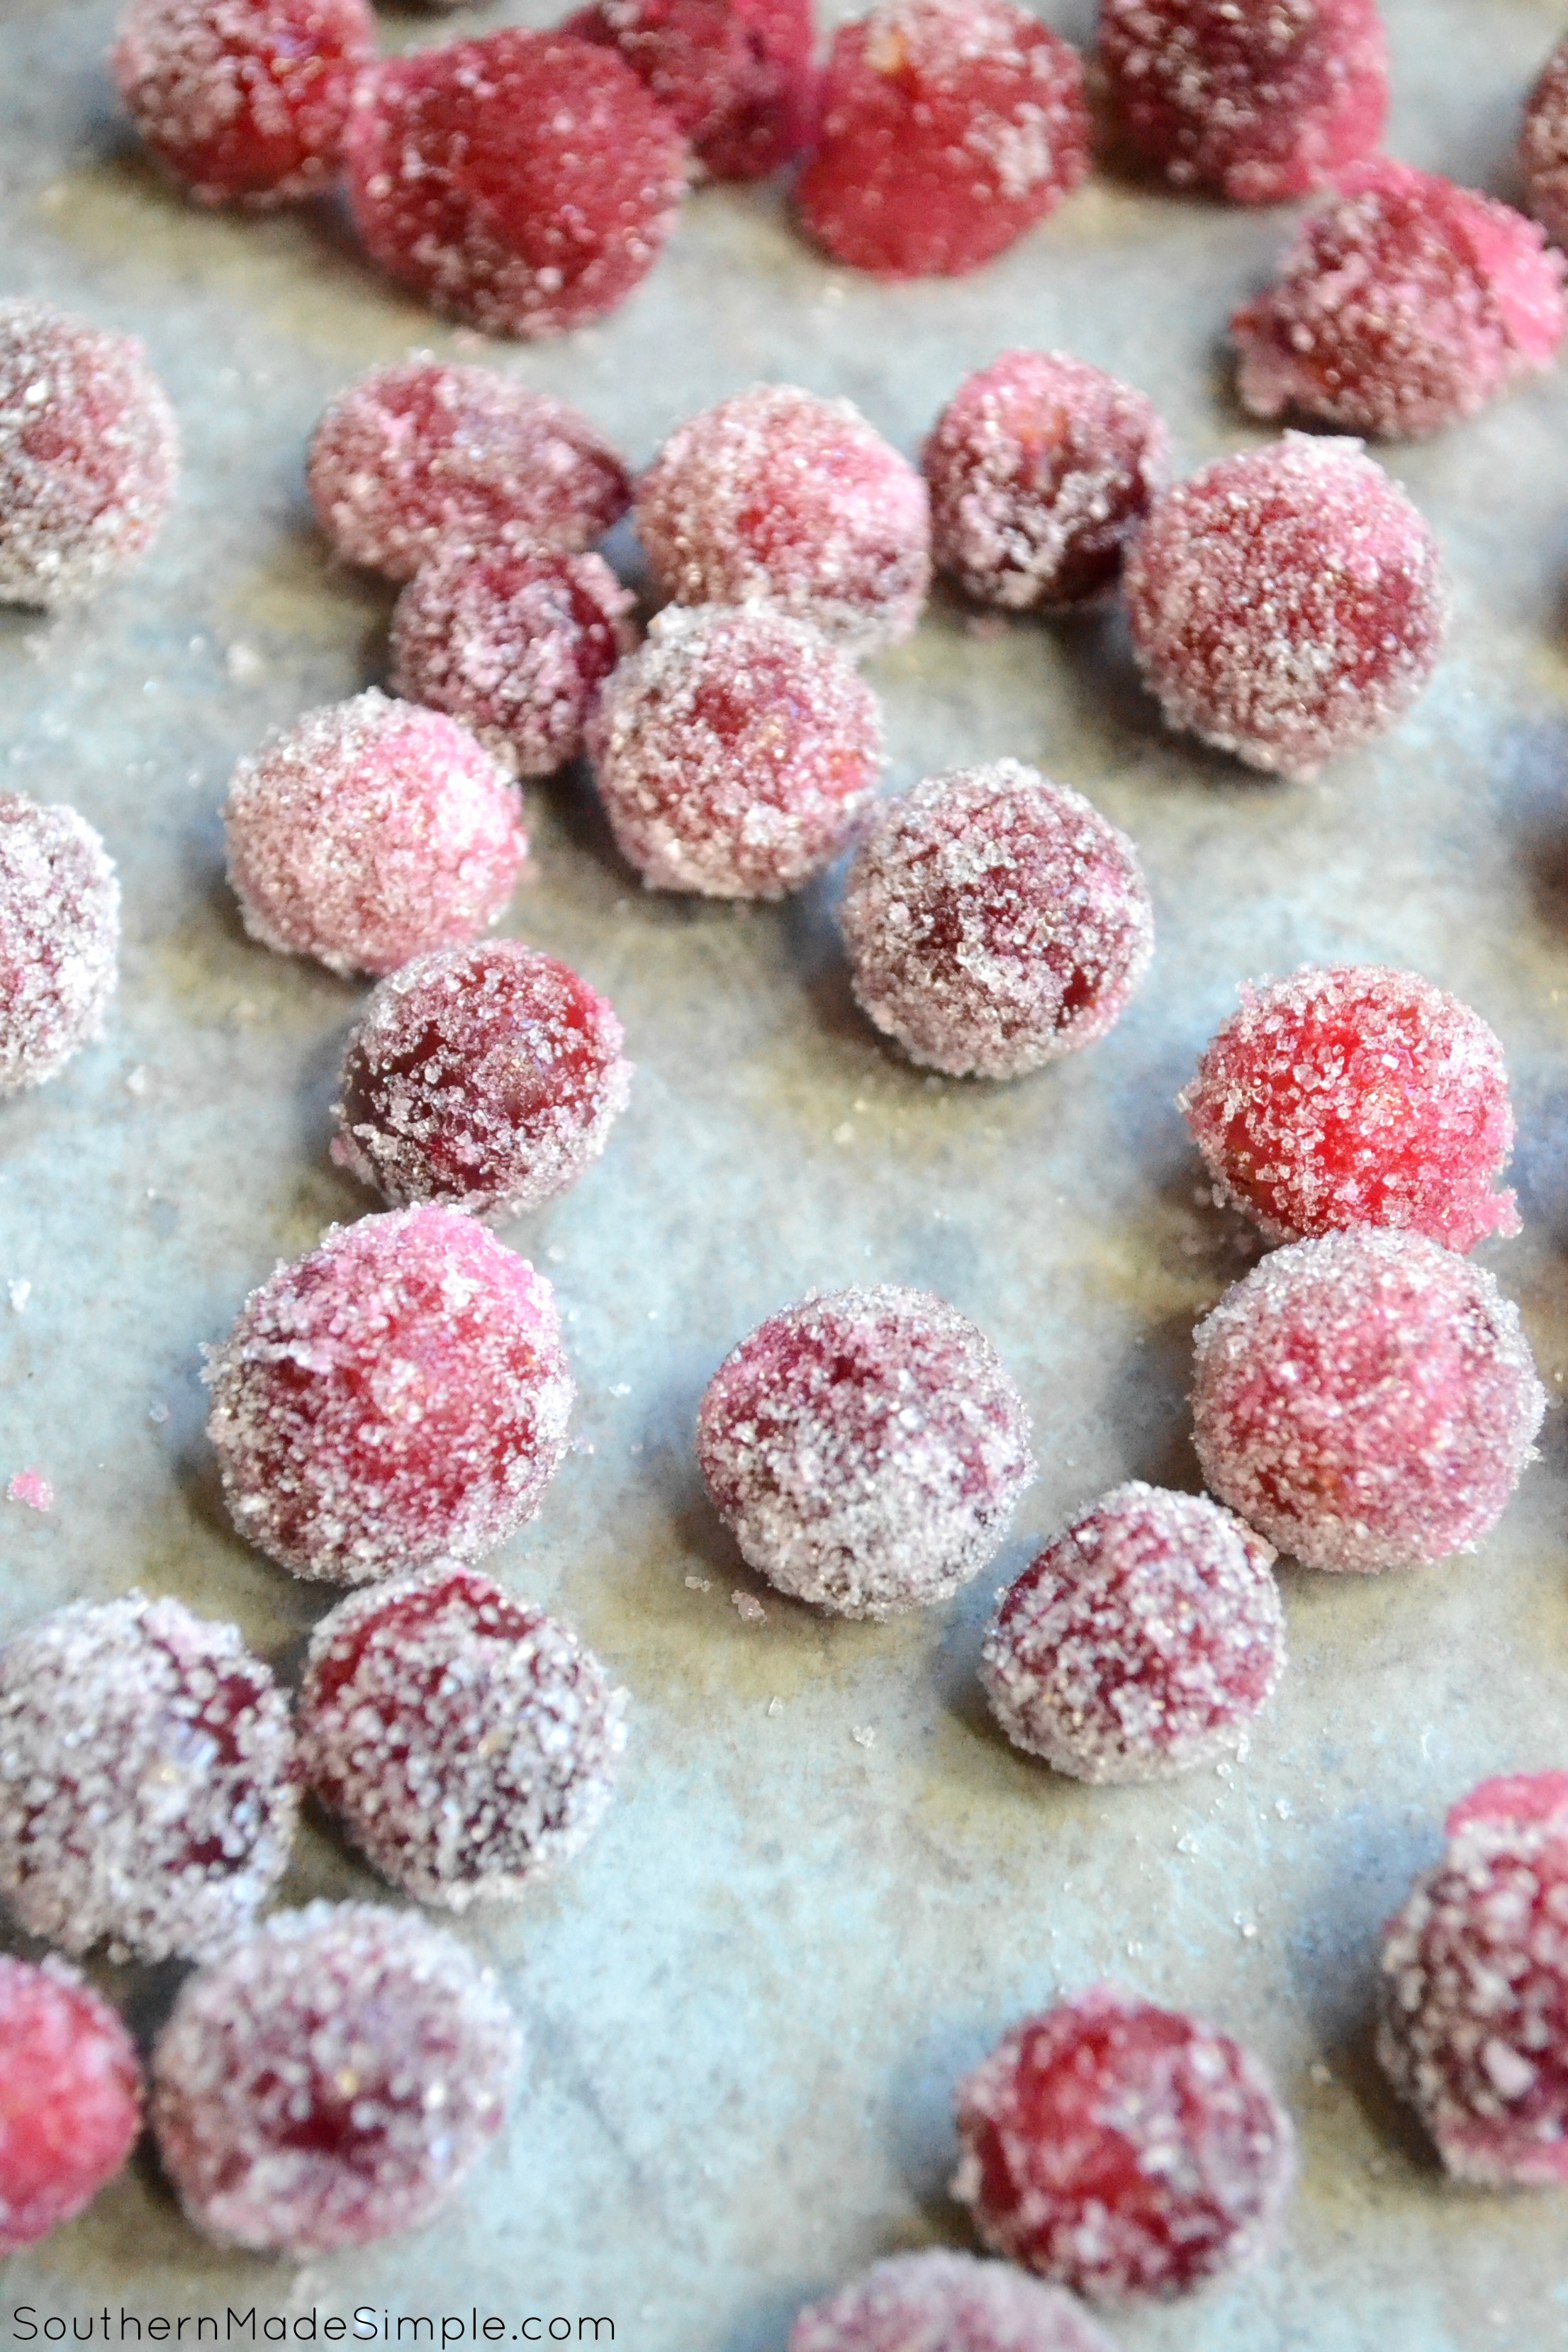 Sugared Cranberries - an easy way to use up leftover cranberries from your holiday baking!